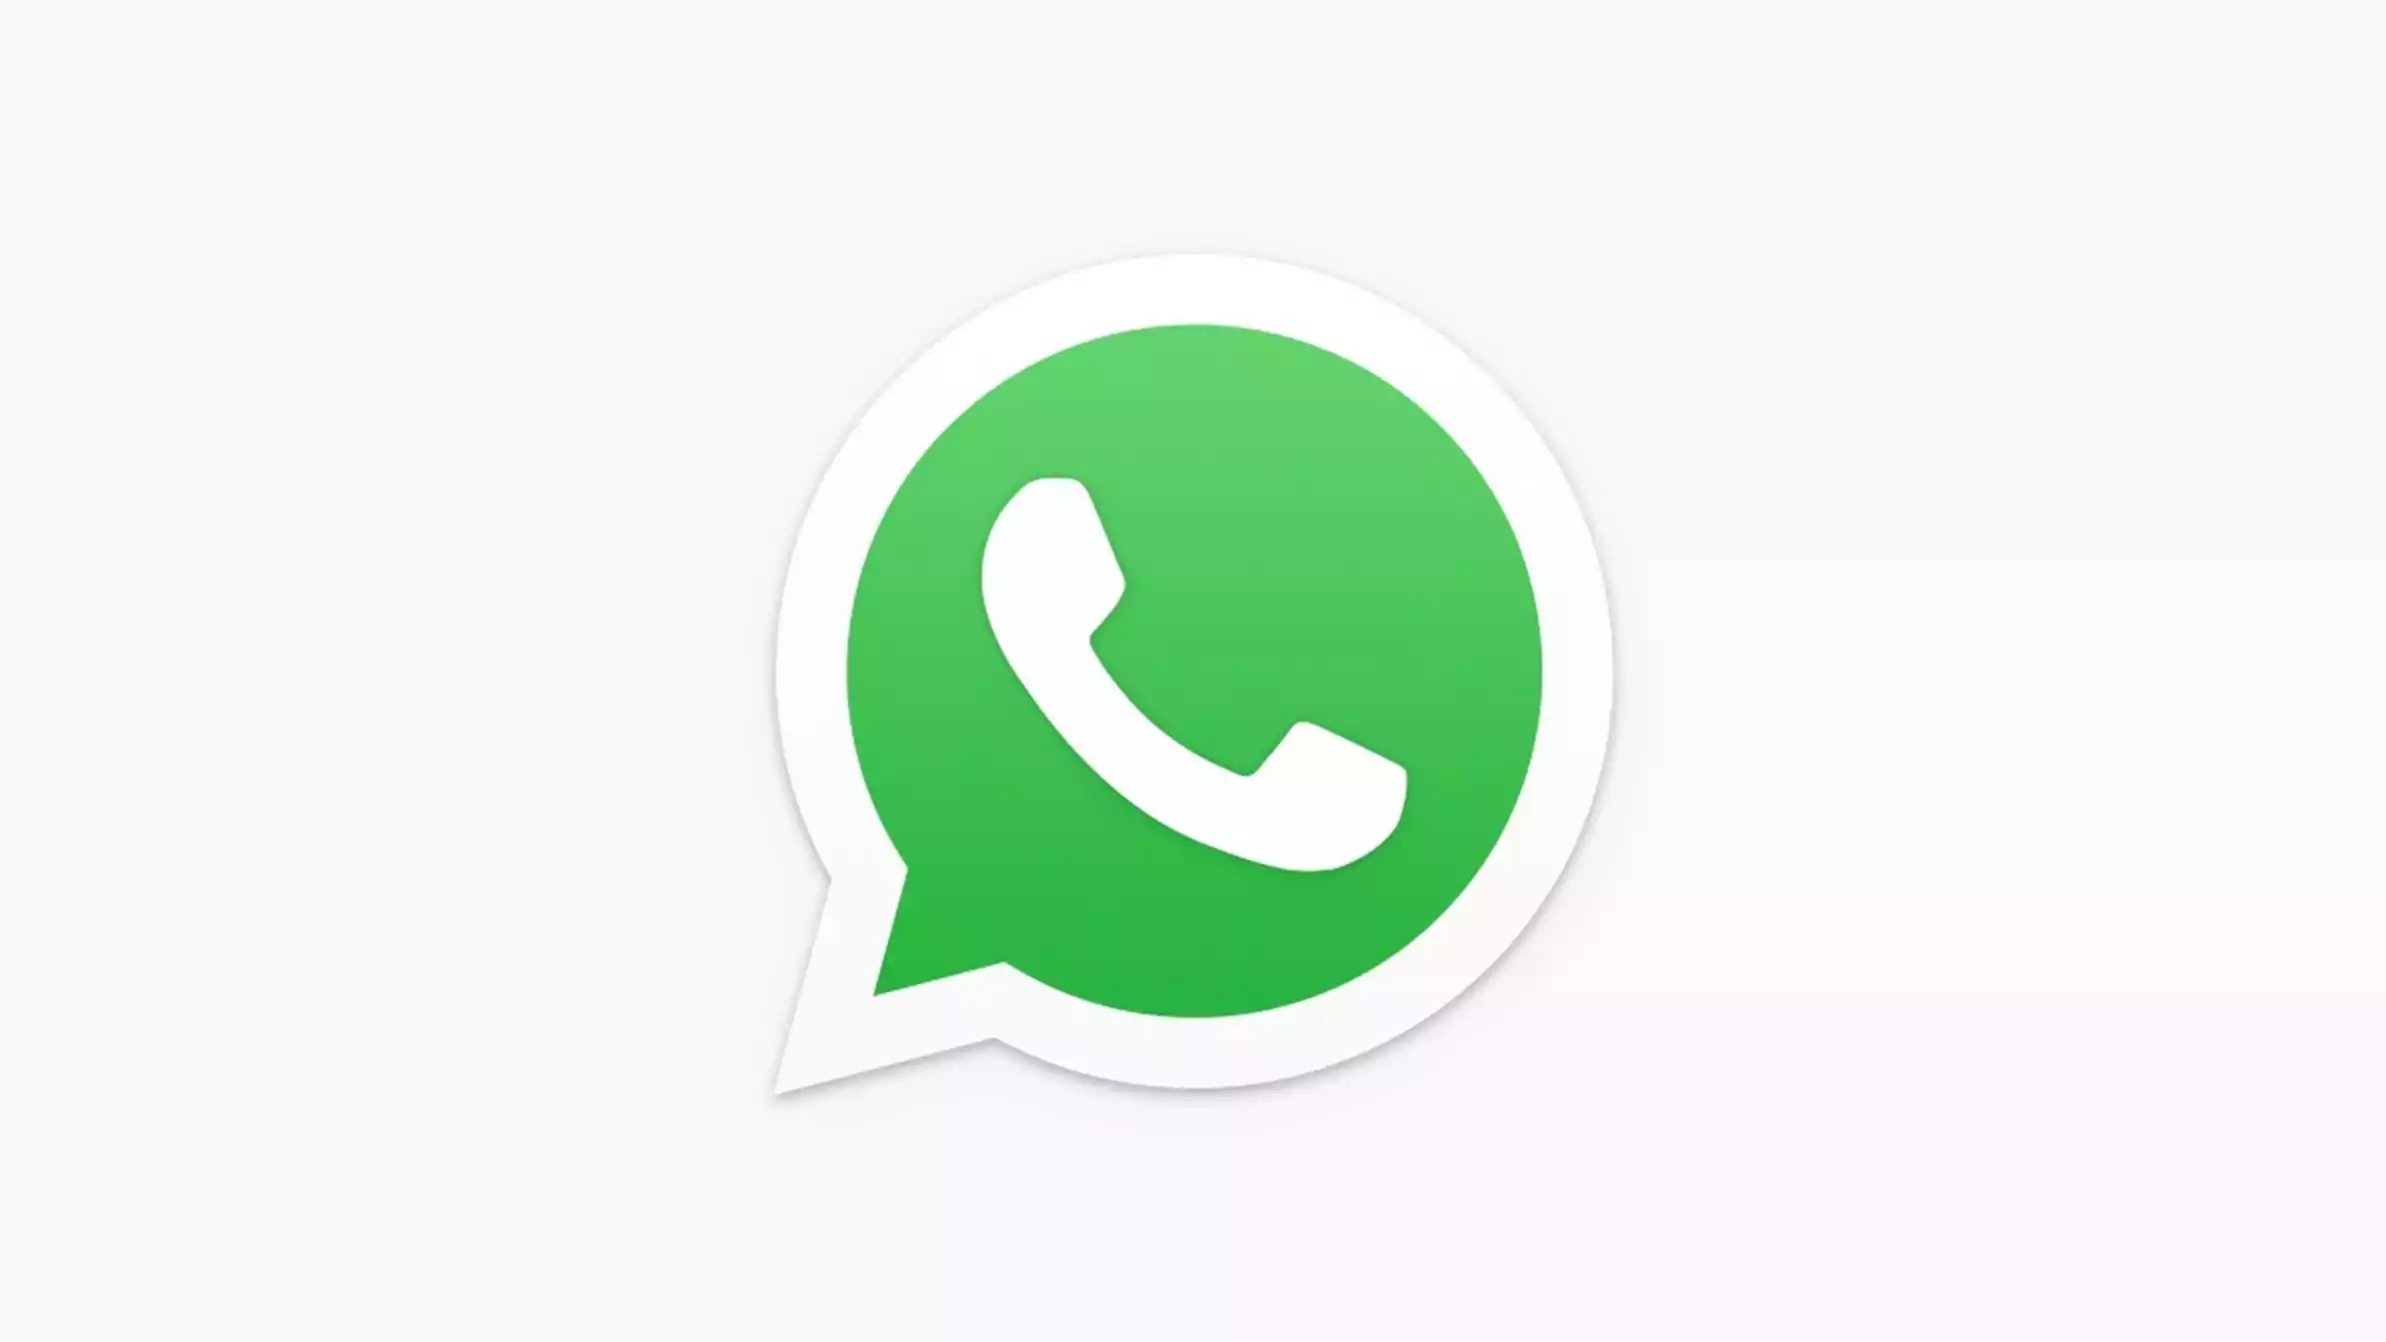 "Here’s How WhatsApp Community Feature May Work On Android Smartphones